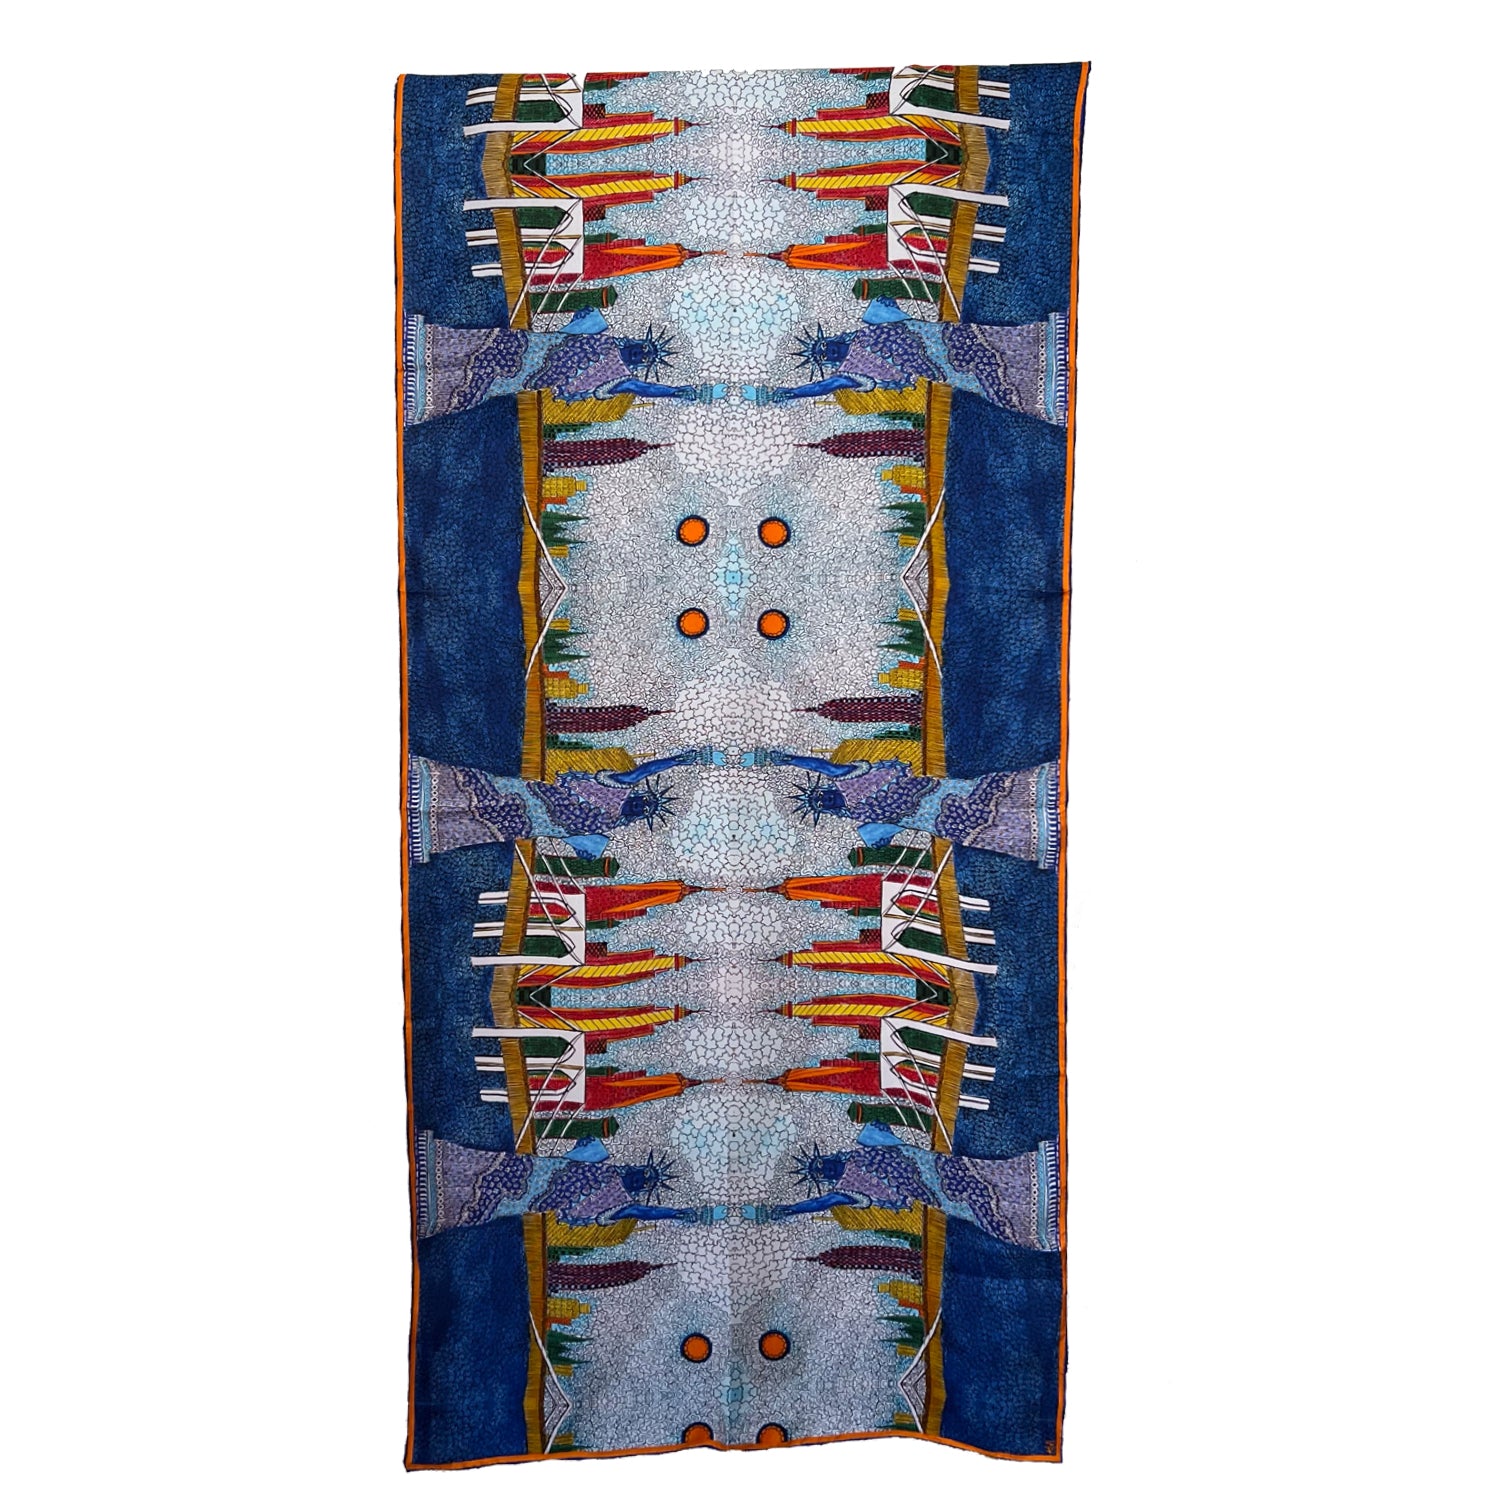 nyc long silk scarf with Statue of Liberty and city scape painted in folk style and printed on silk, chetnasingh scarves